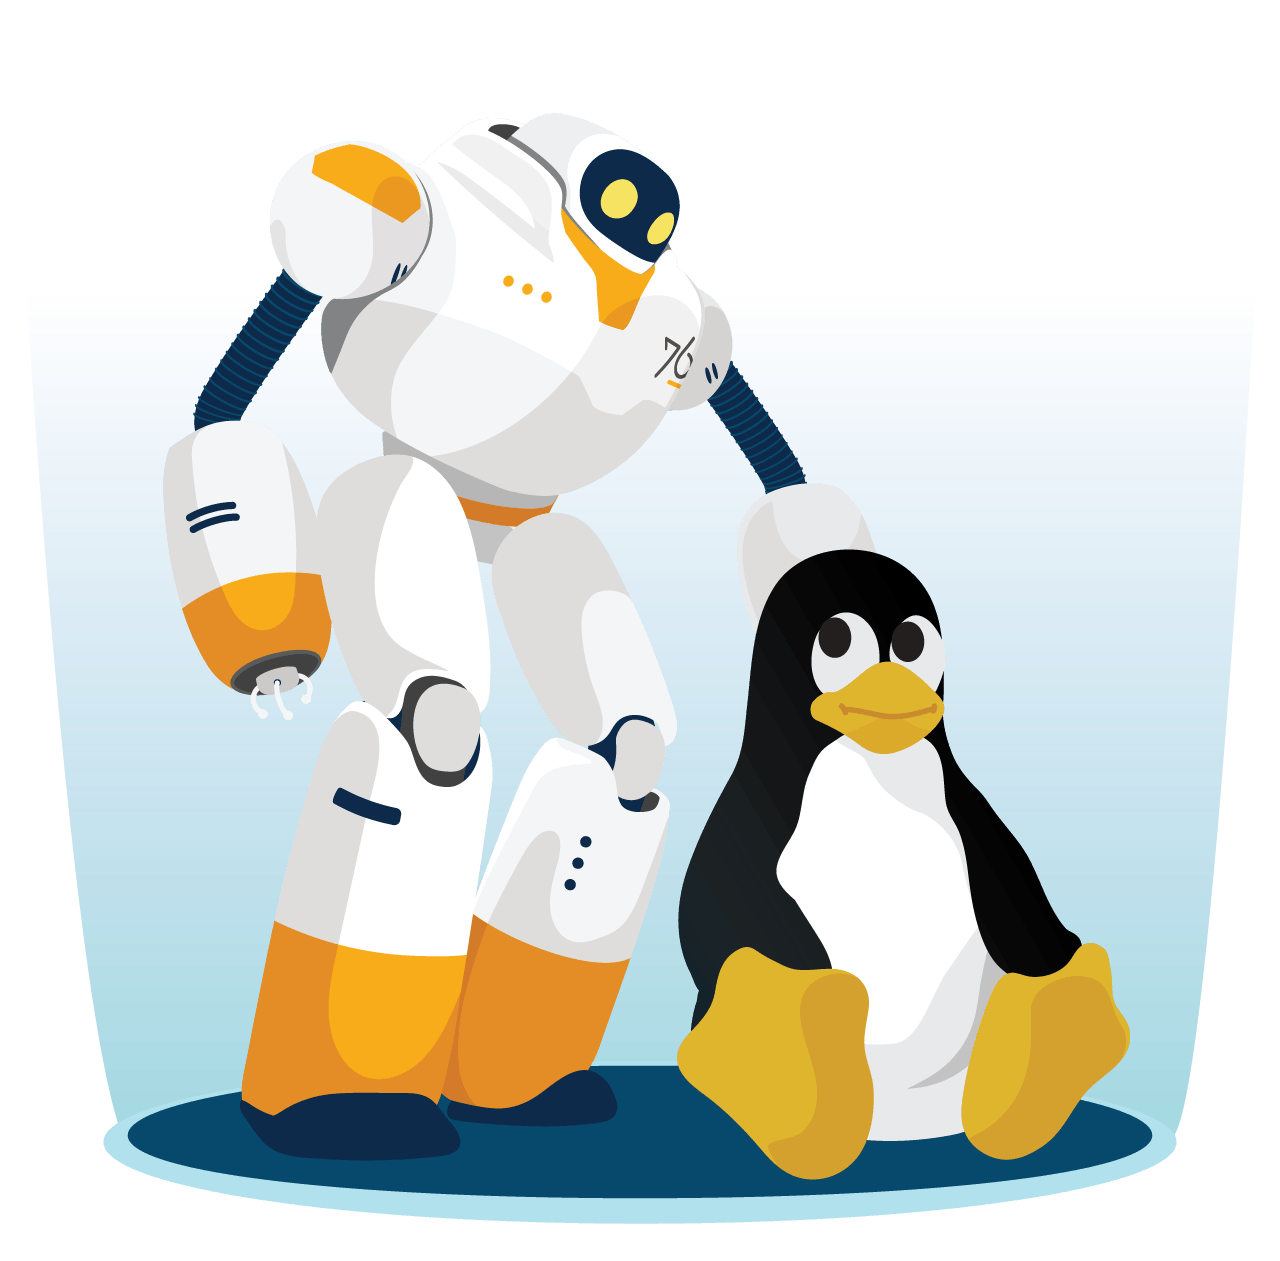 The System76 robot mascot M3lvin and the Linux penguin mascot Tux together. 